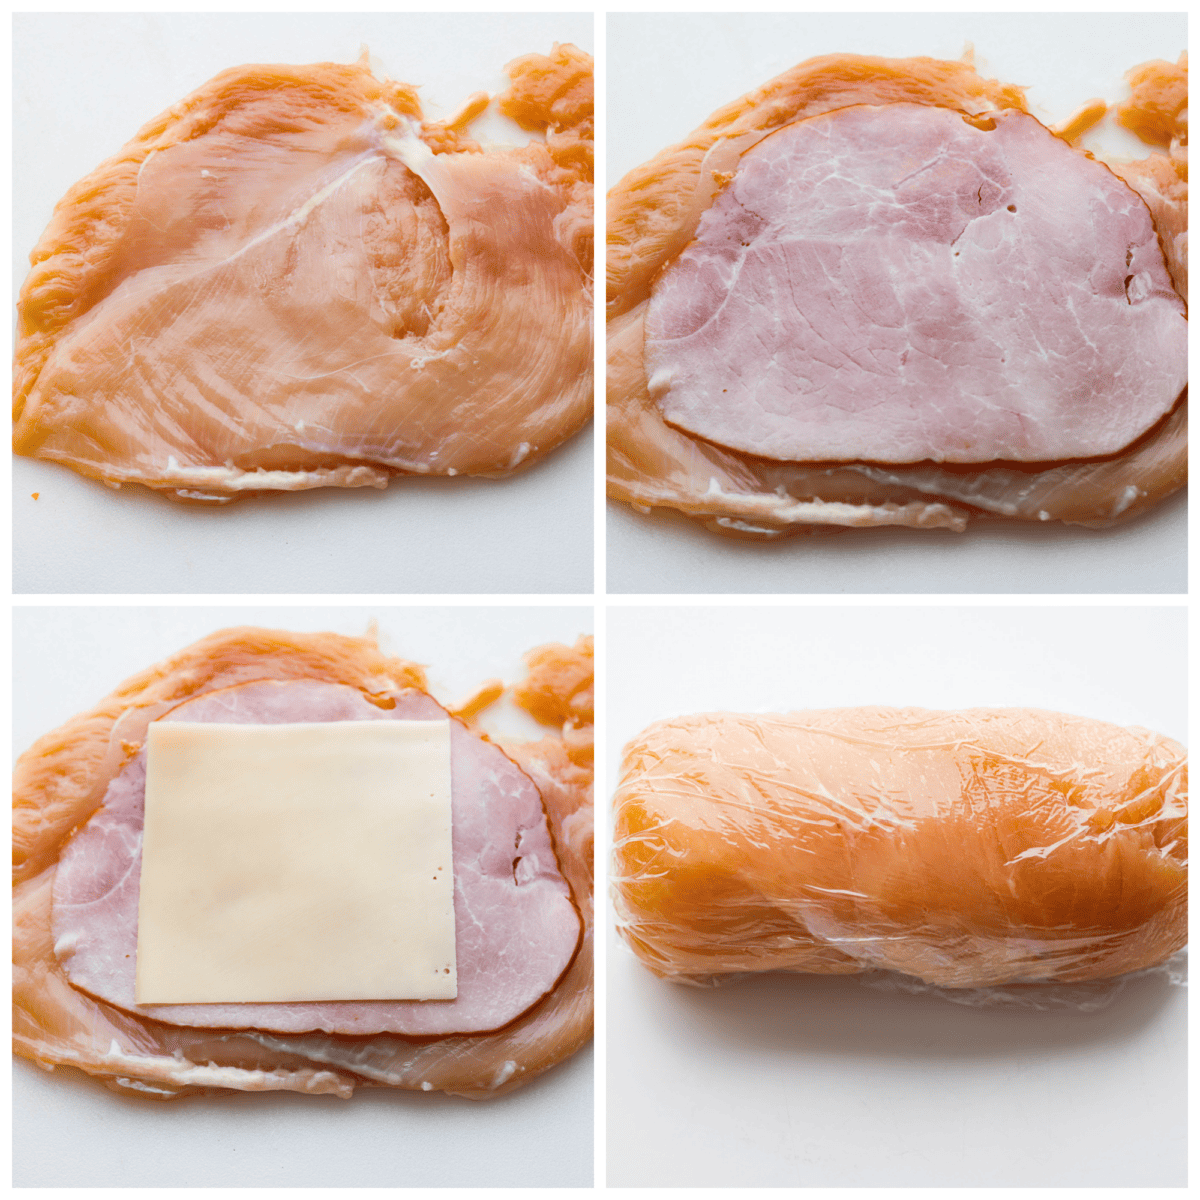 First photo of chicken pounded thin. Second photo of ham layered on top of the chicken. Third photo of cheese layered on the ham. Fourth photo of chicken rolled into a log and wrapped in plastic wrap.